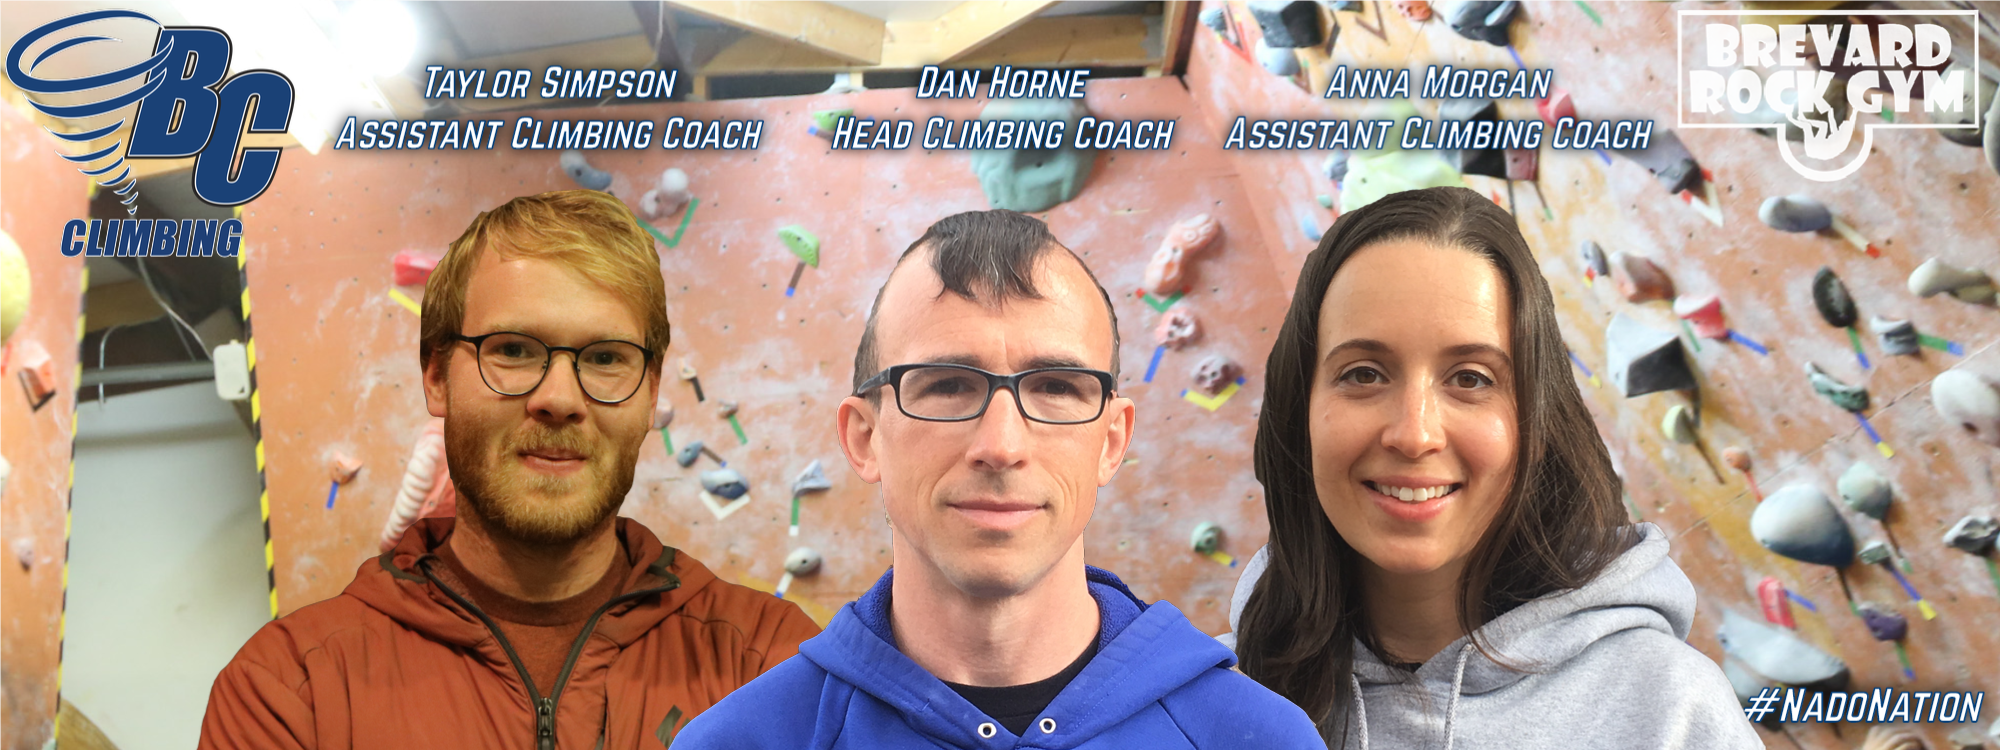 New Climbing Coaching Staff Named at Brevard College